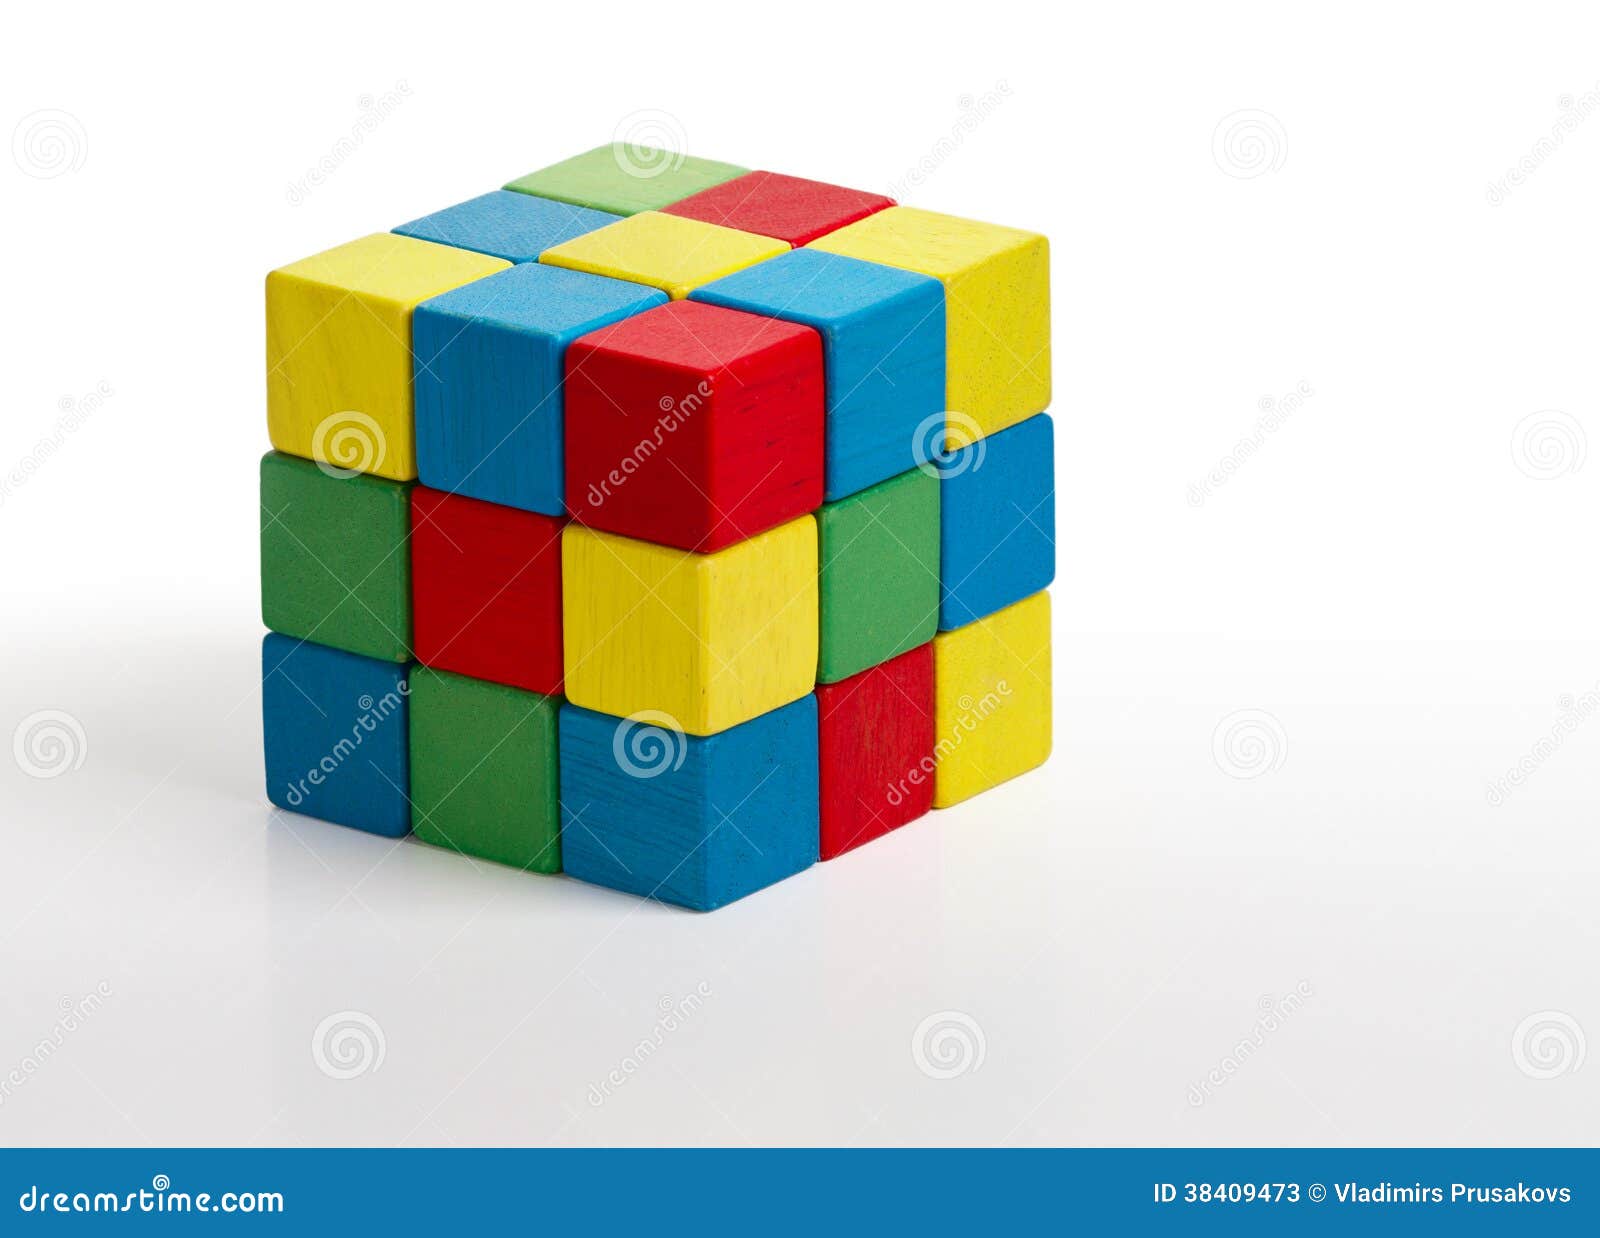 Jigsaw Puzzle Rubik Cube Toy, Multicolor Wooden Pi Stock Photo - Image of rubic, empty: 38409473